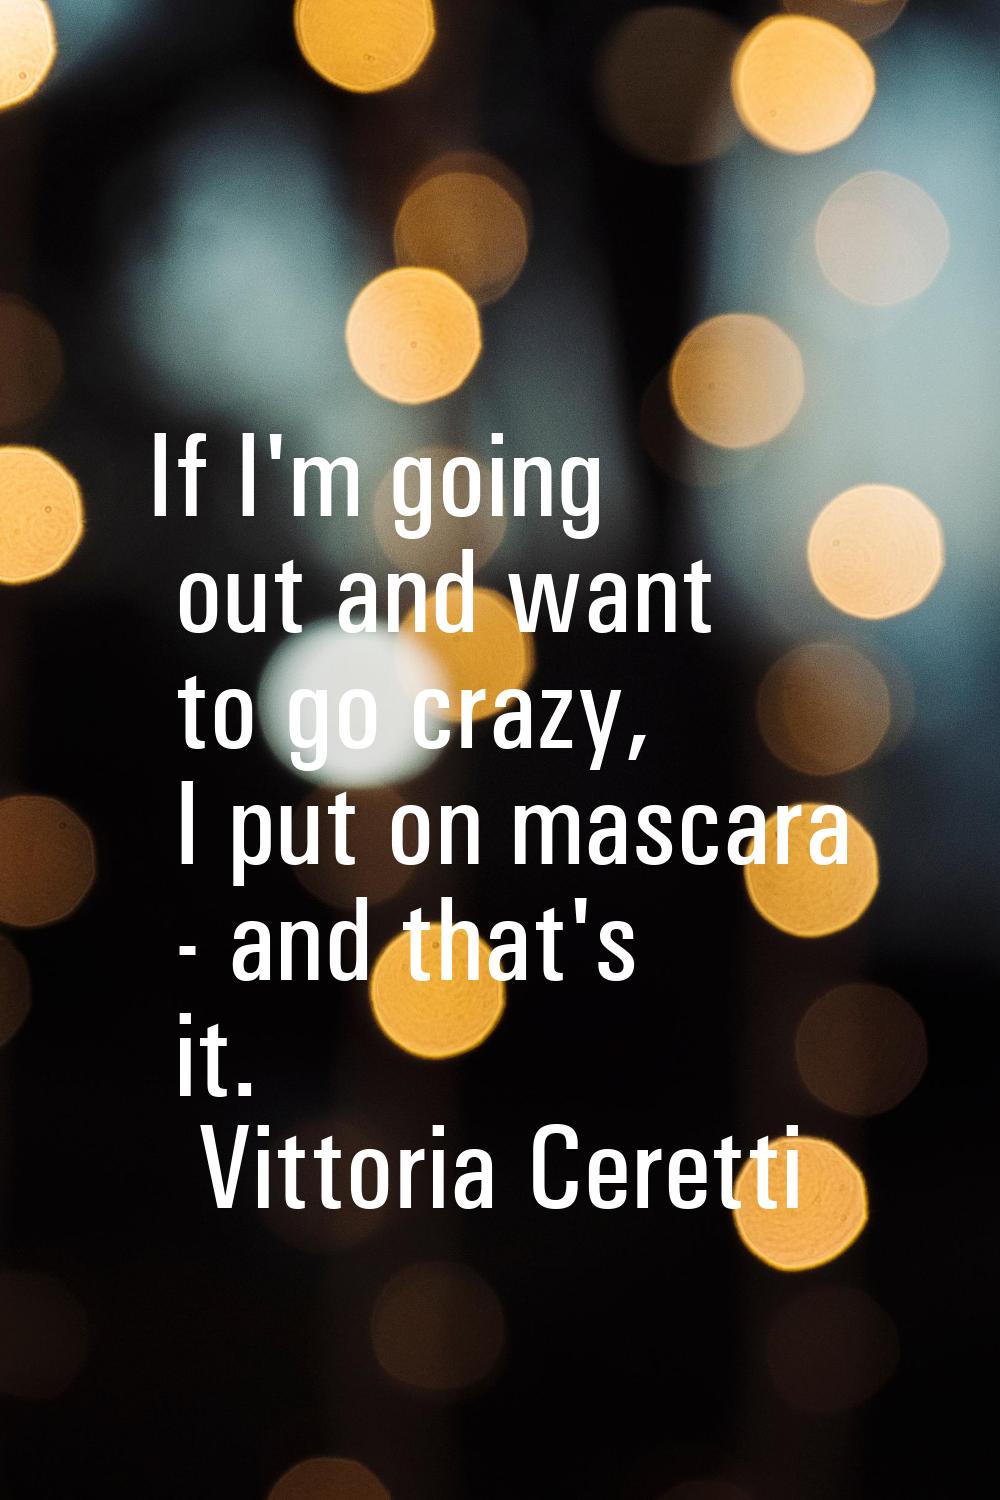 If I'm going out and want to go crazy, I put on mascara - and that's it.